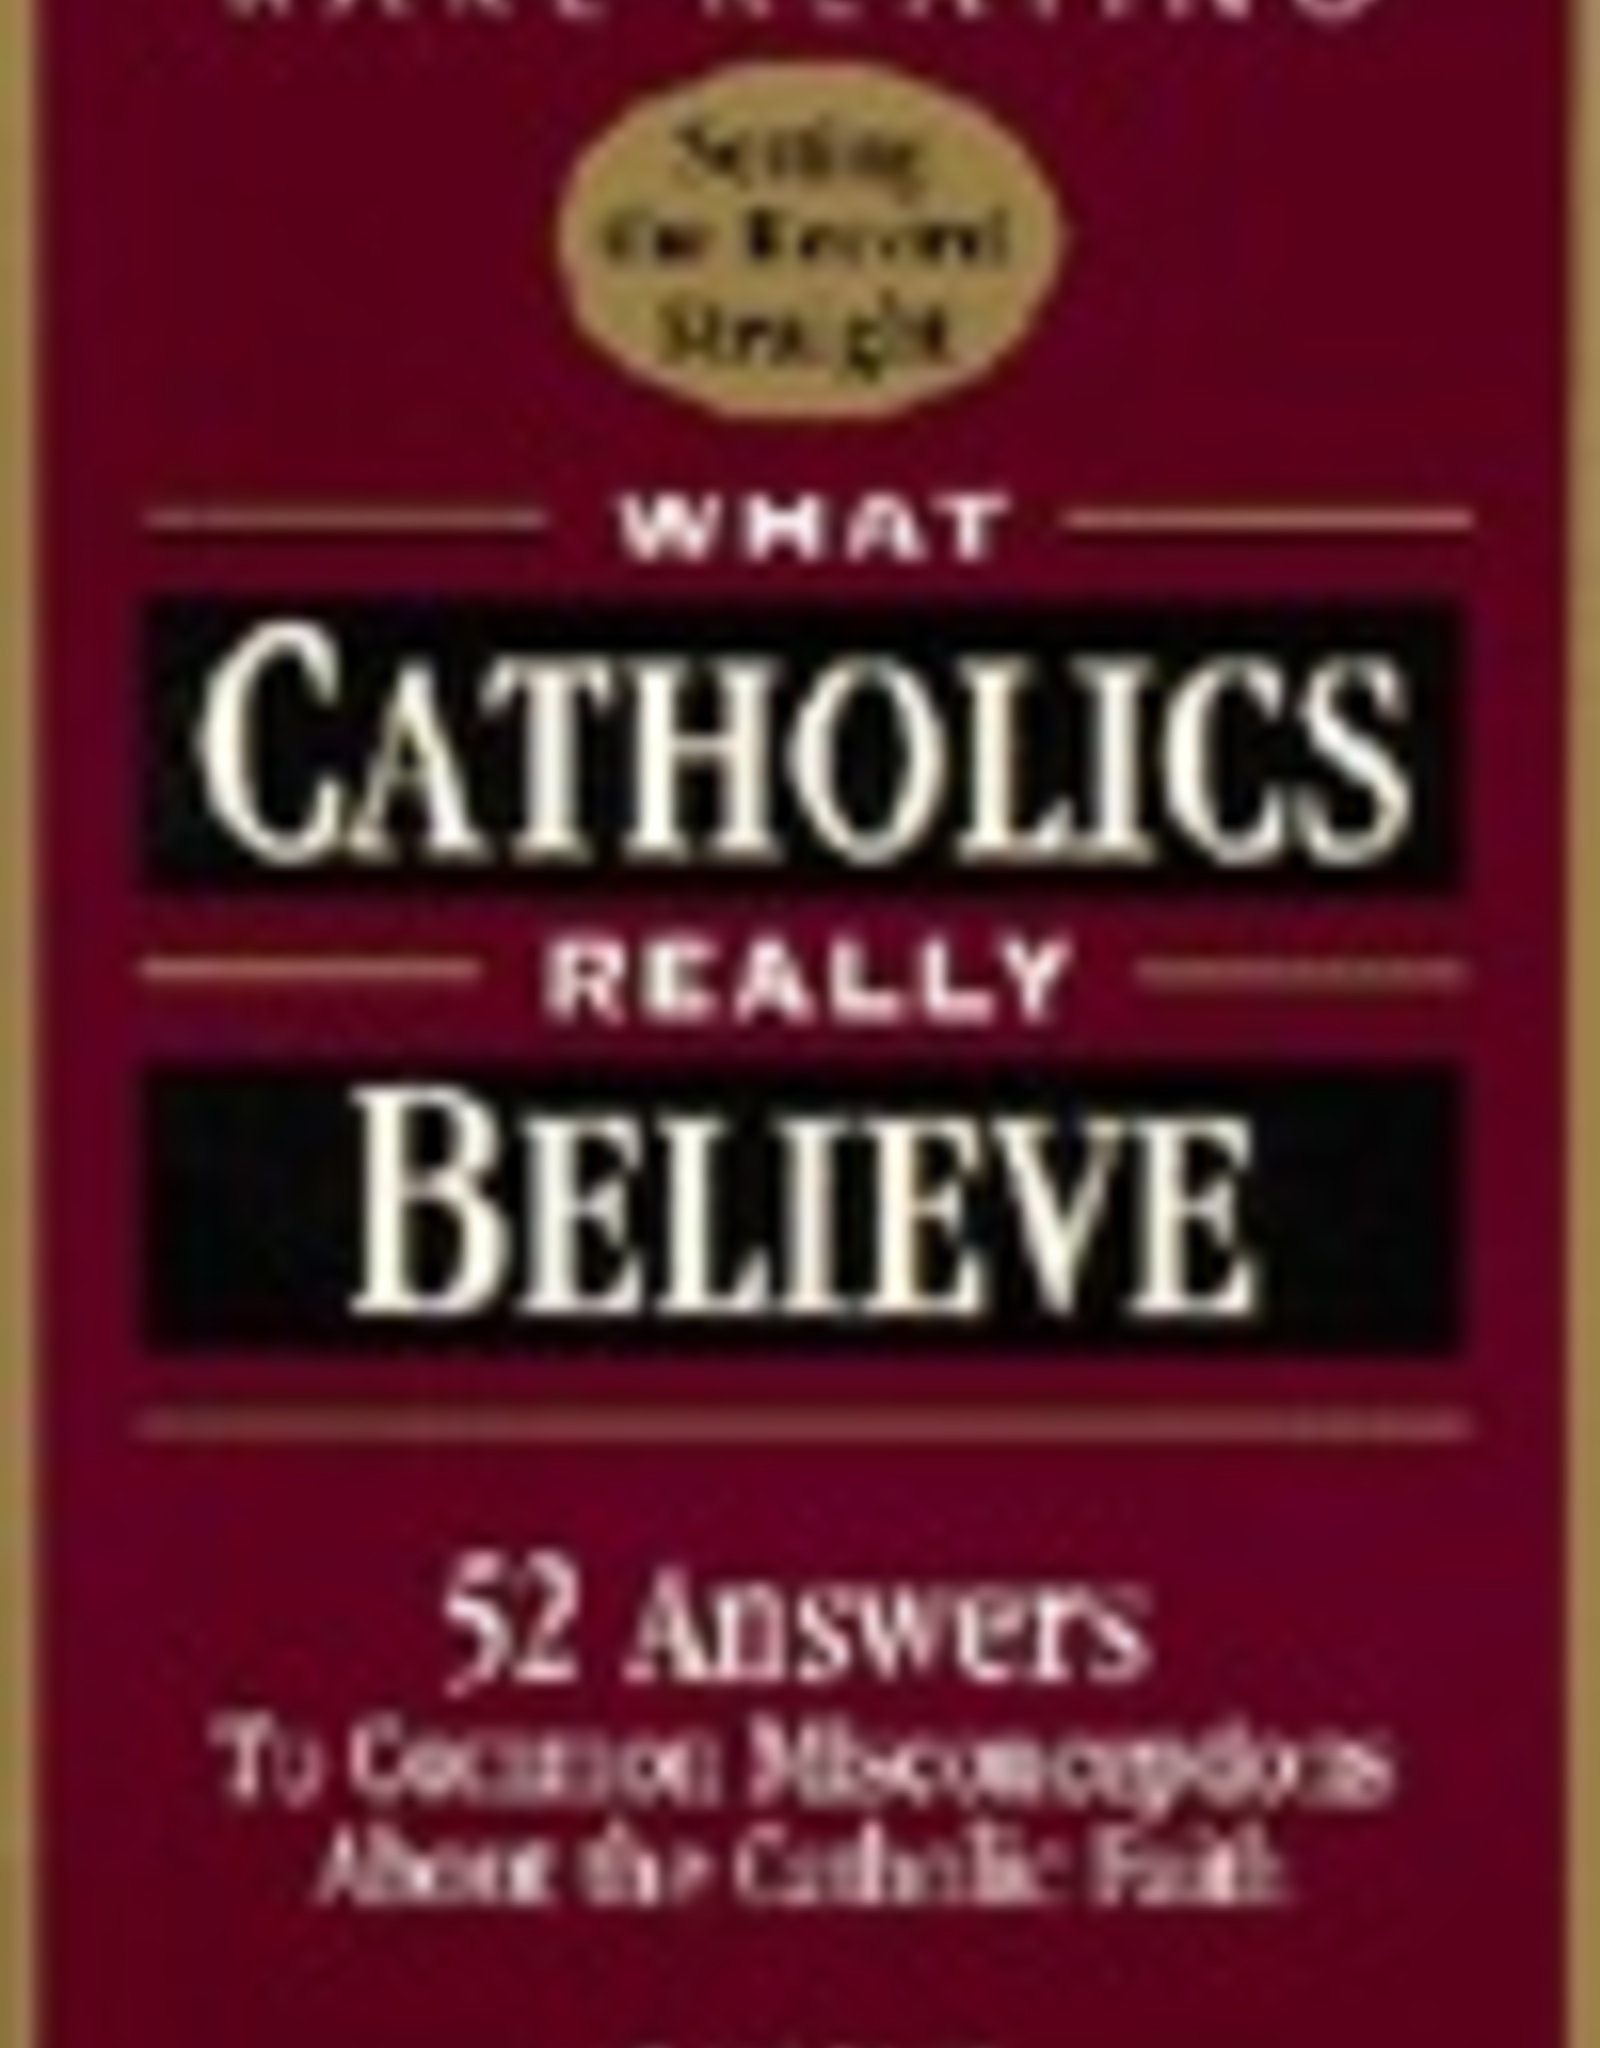 Ignatius Press What Catholics Really Believe:  Answers to Common Misconceptions About the Fath, by Karl Keating (paperback)